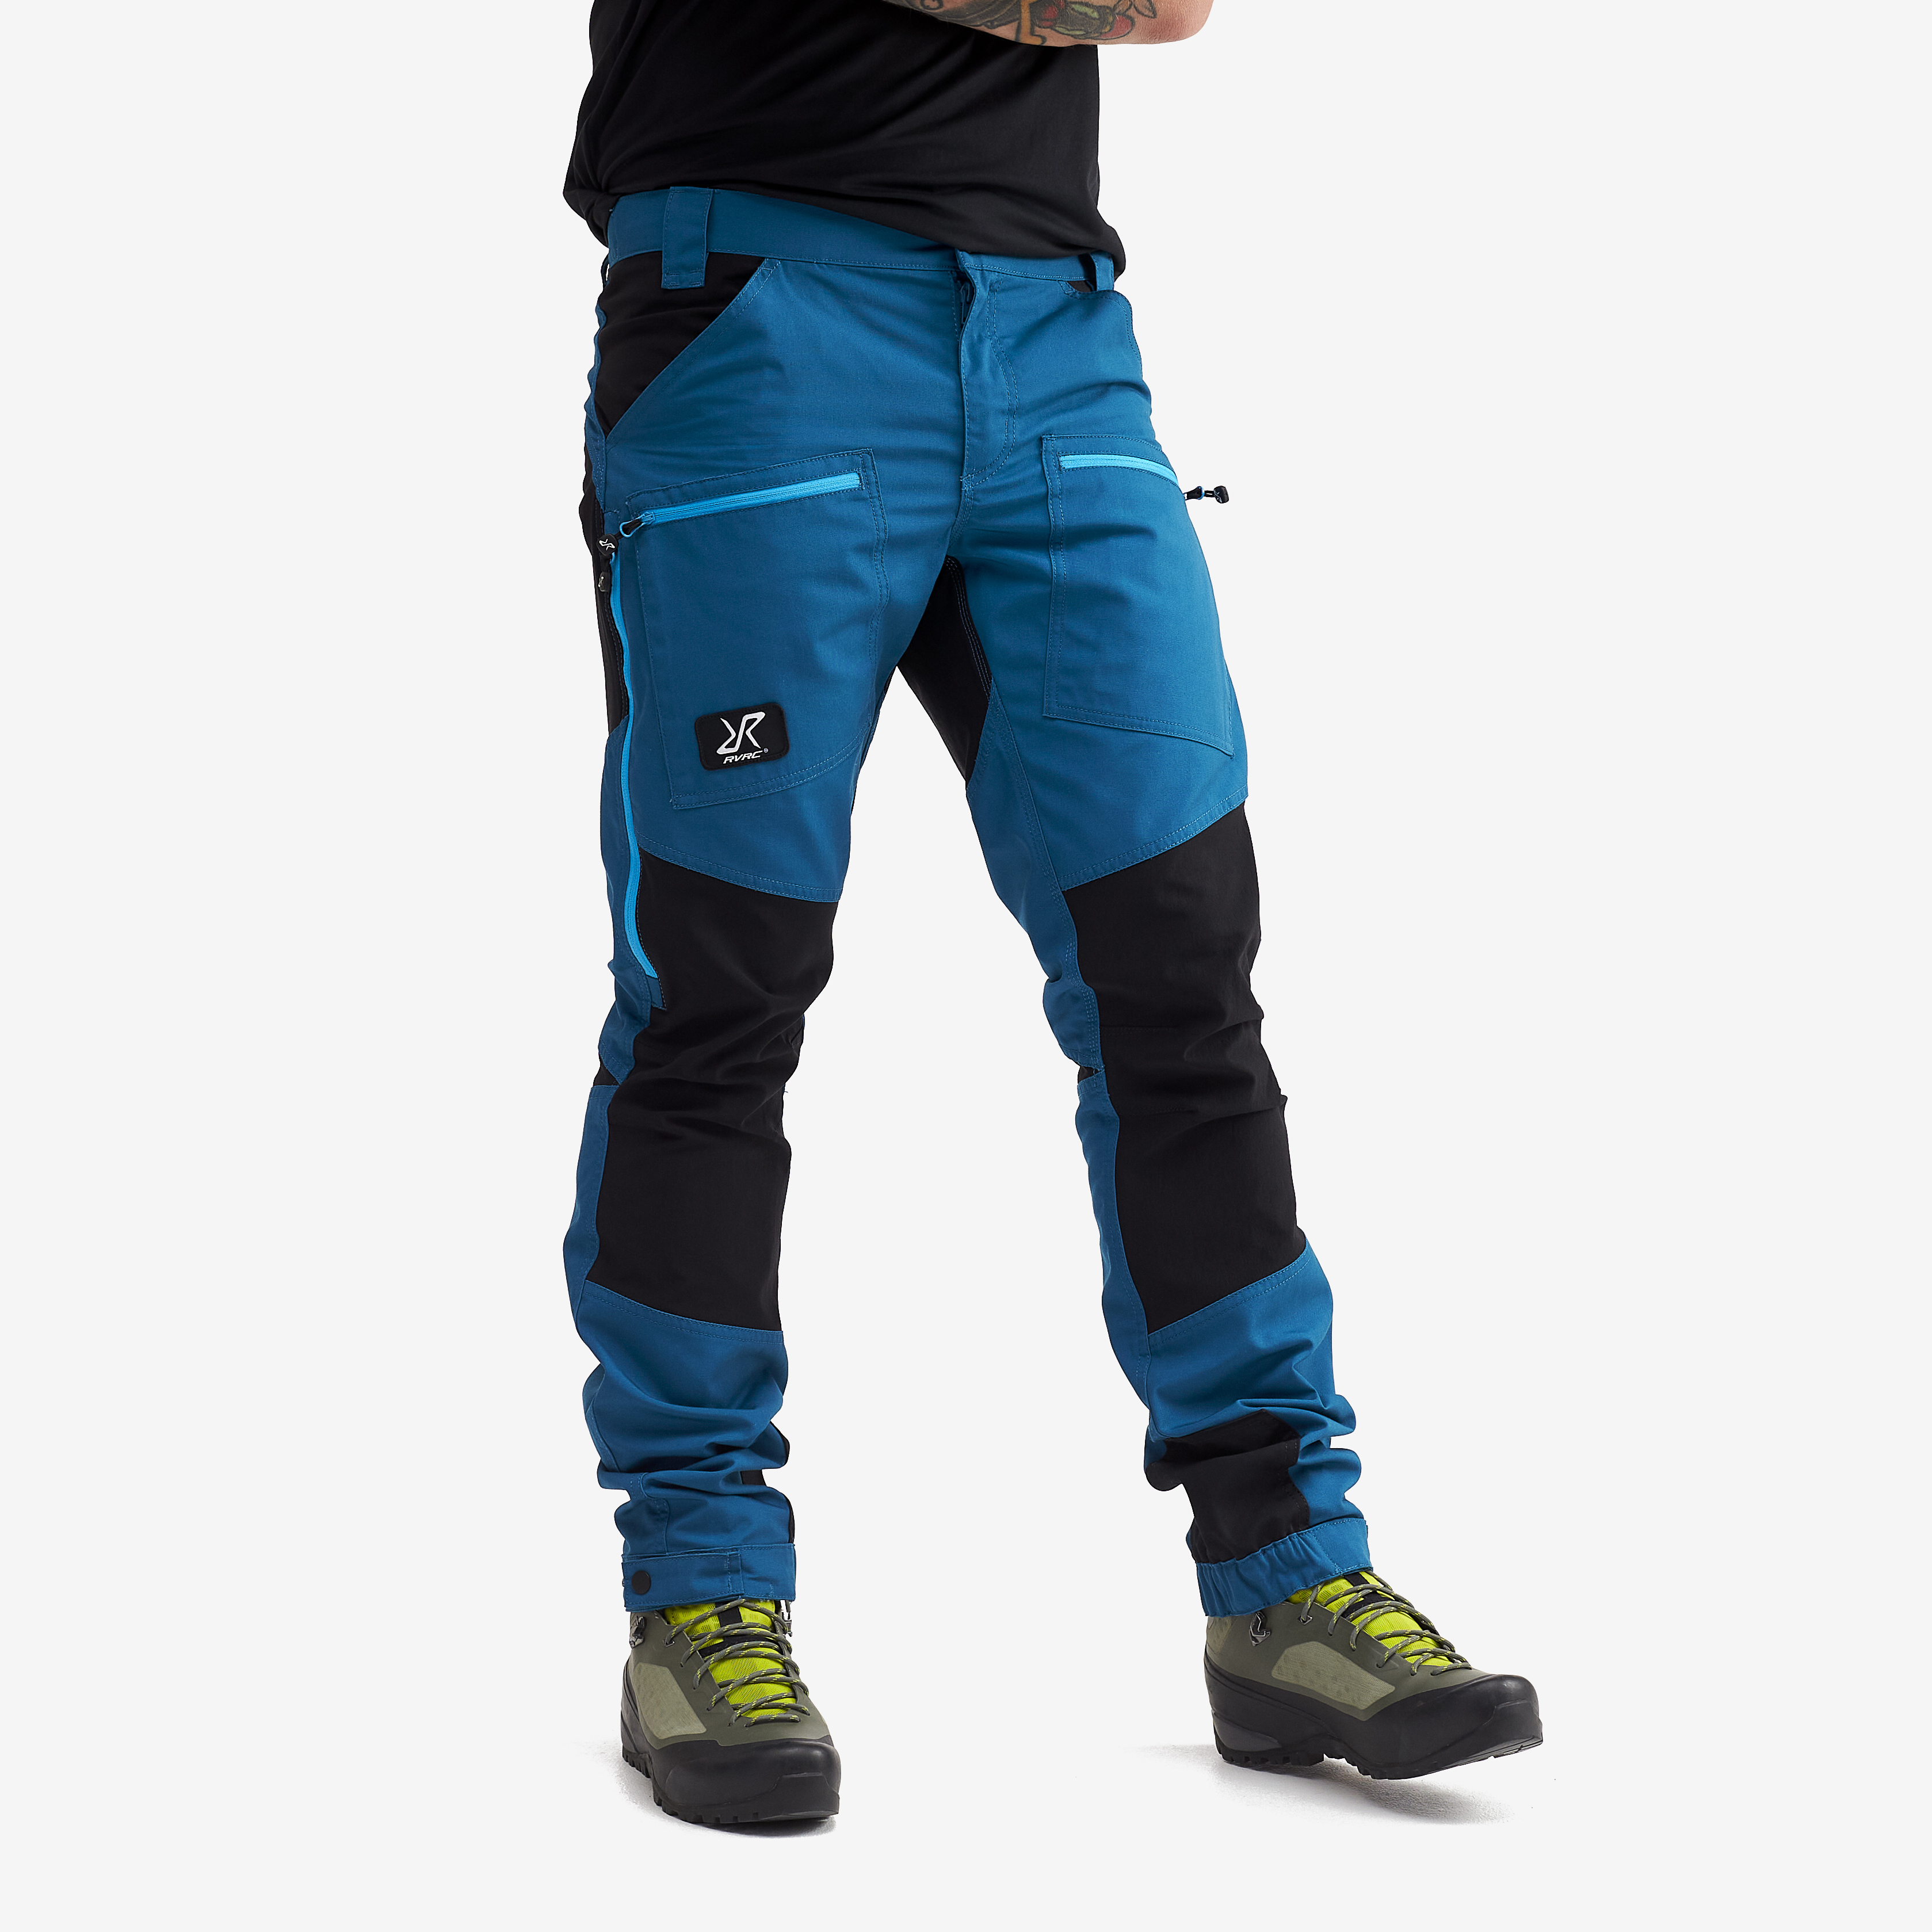 Nordwand Pro Pants Petrol Hombres